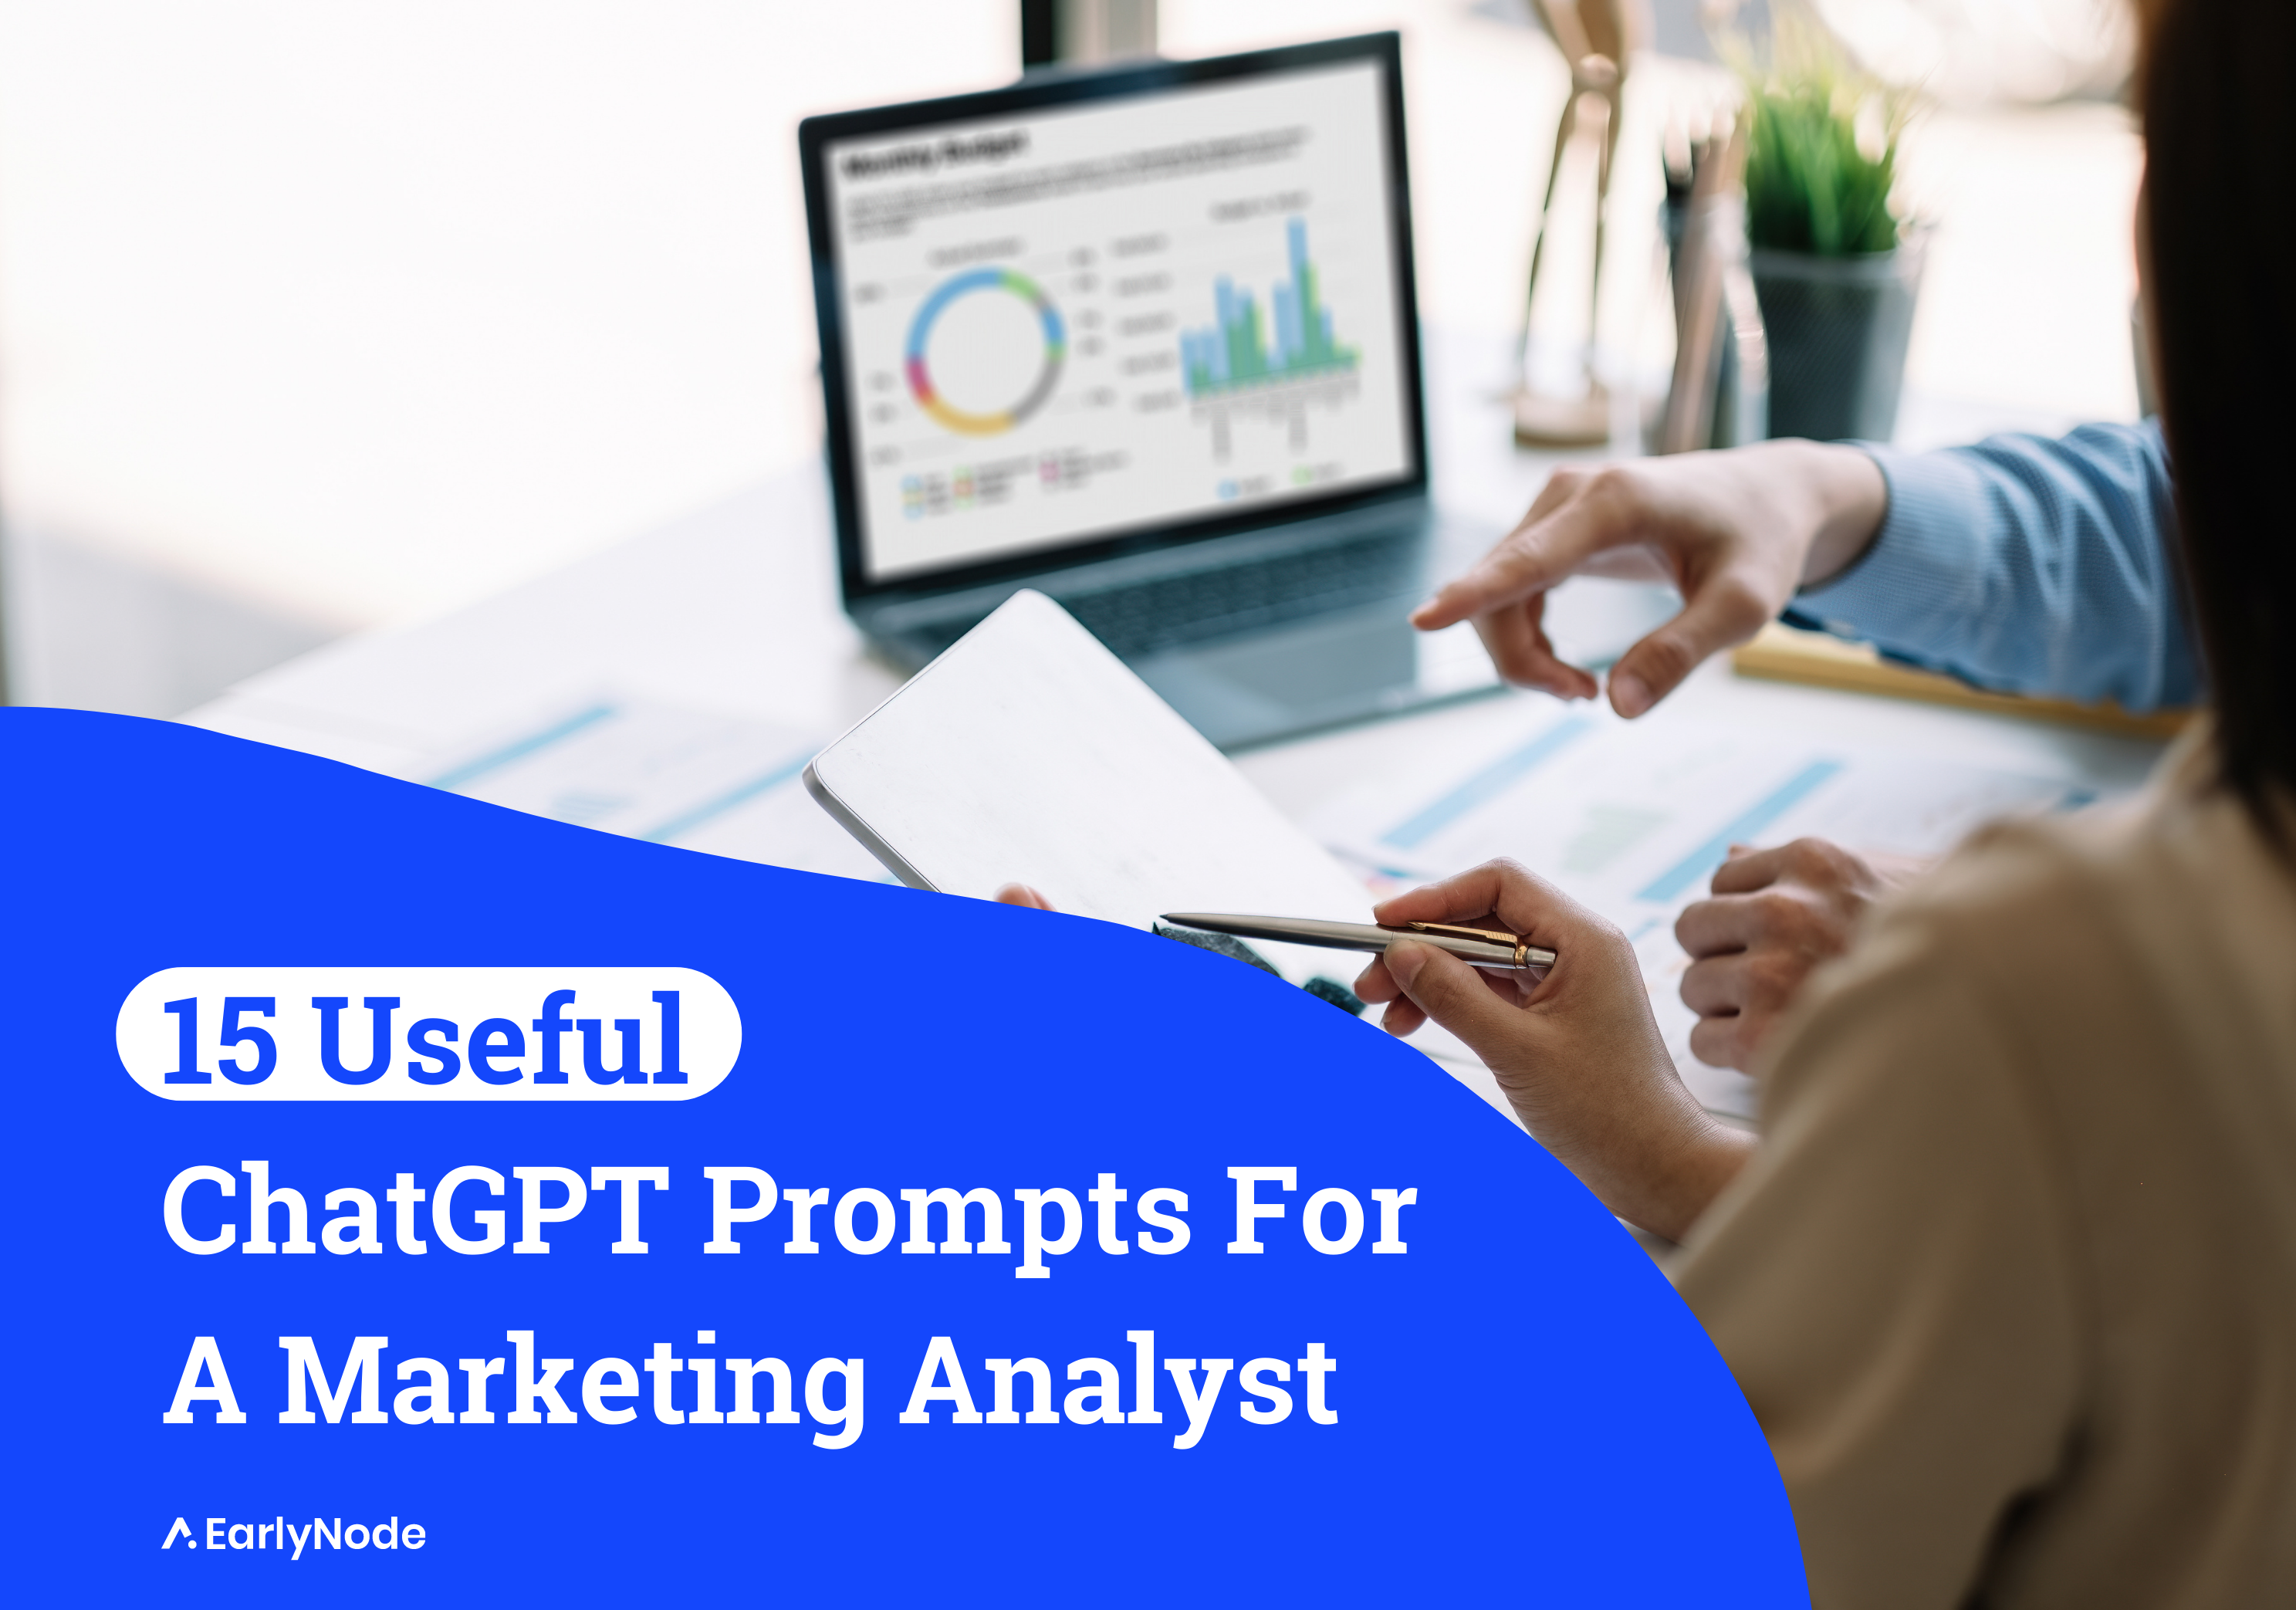 15 ChatGPT Prompts for Marketing Analysts